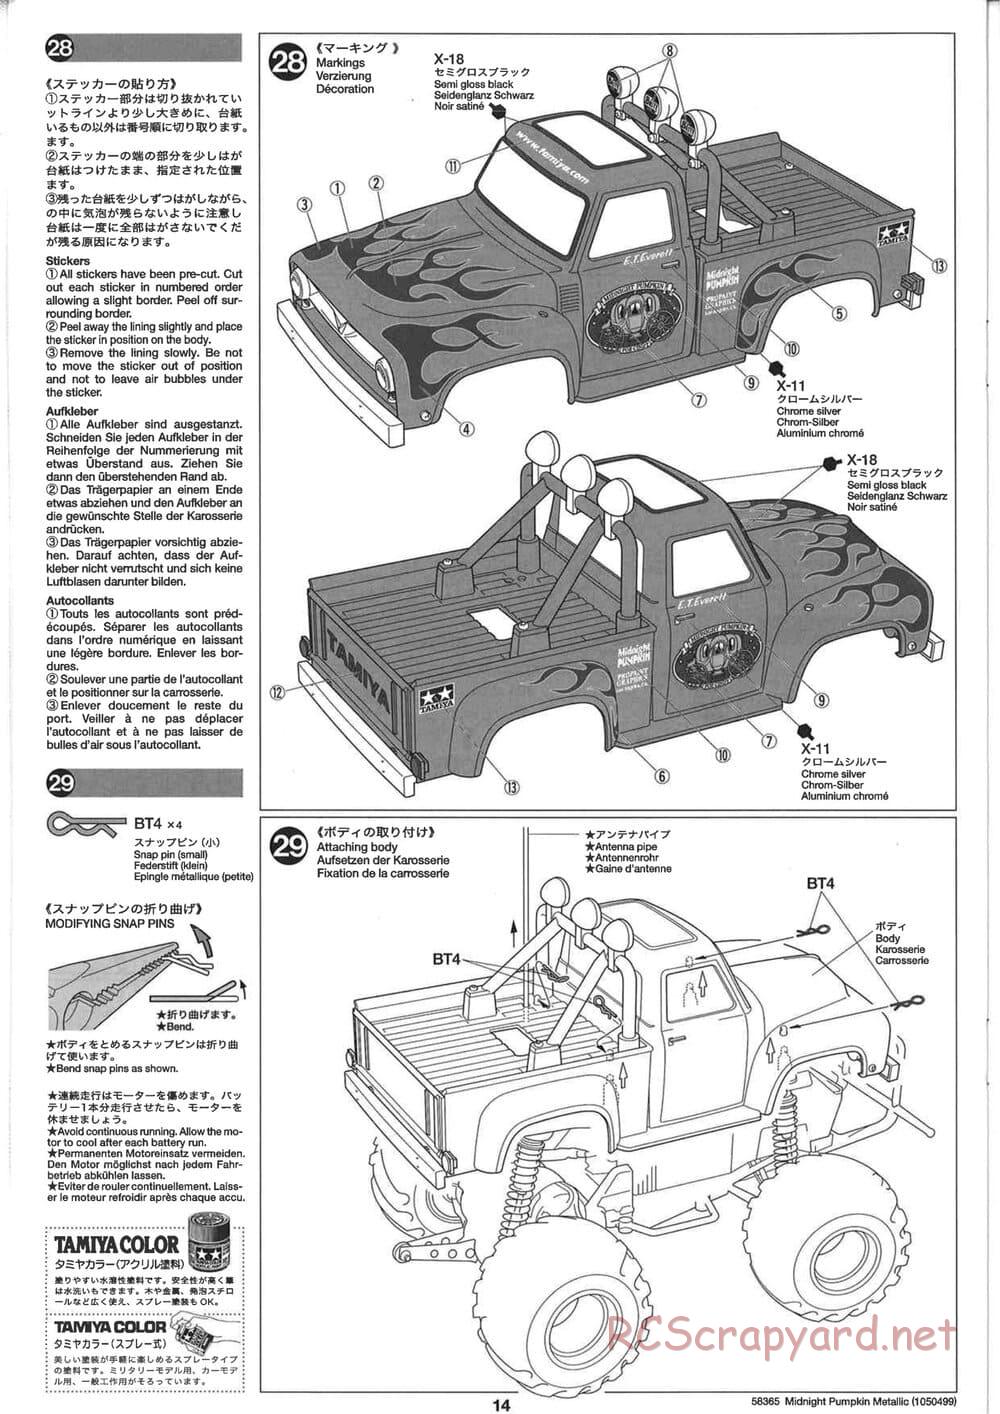 Tamiya - Midnight Pumpkin Chrome Metallic Special - CW-01 Chassis - Manual - Page 14